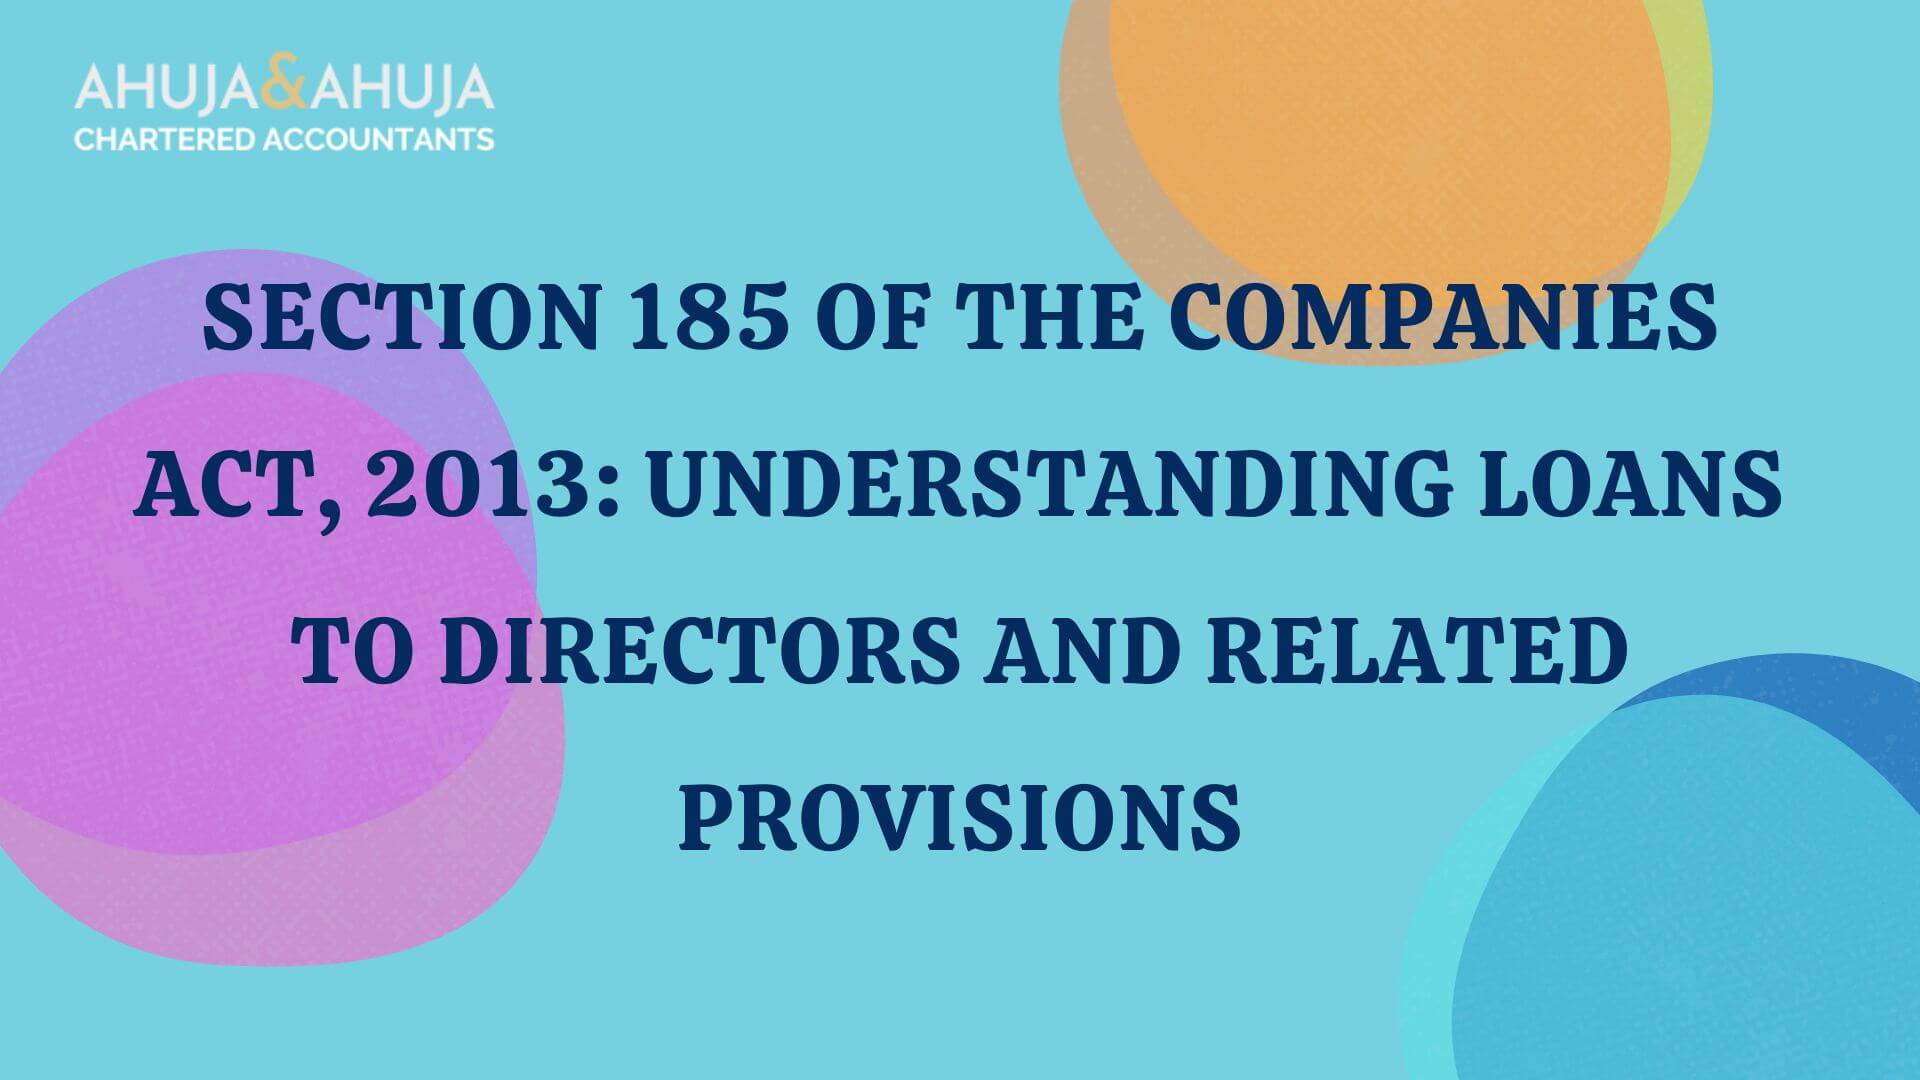 Section 185 of the Companies Act, 2013